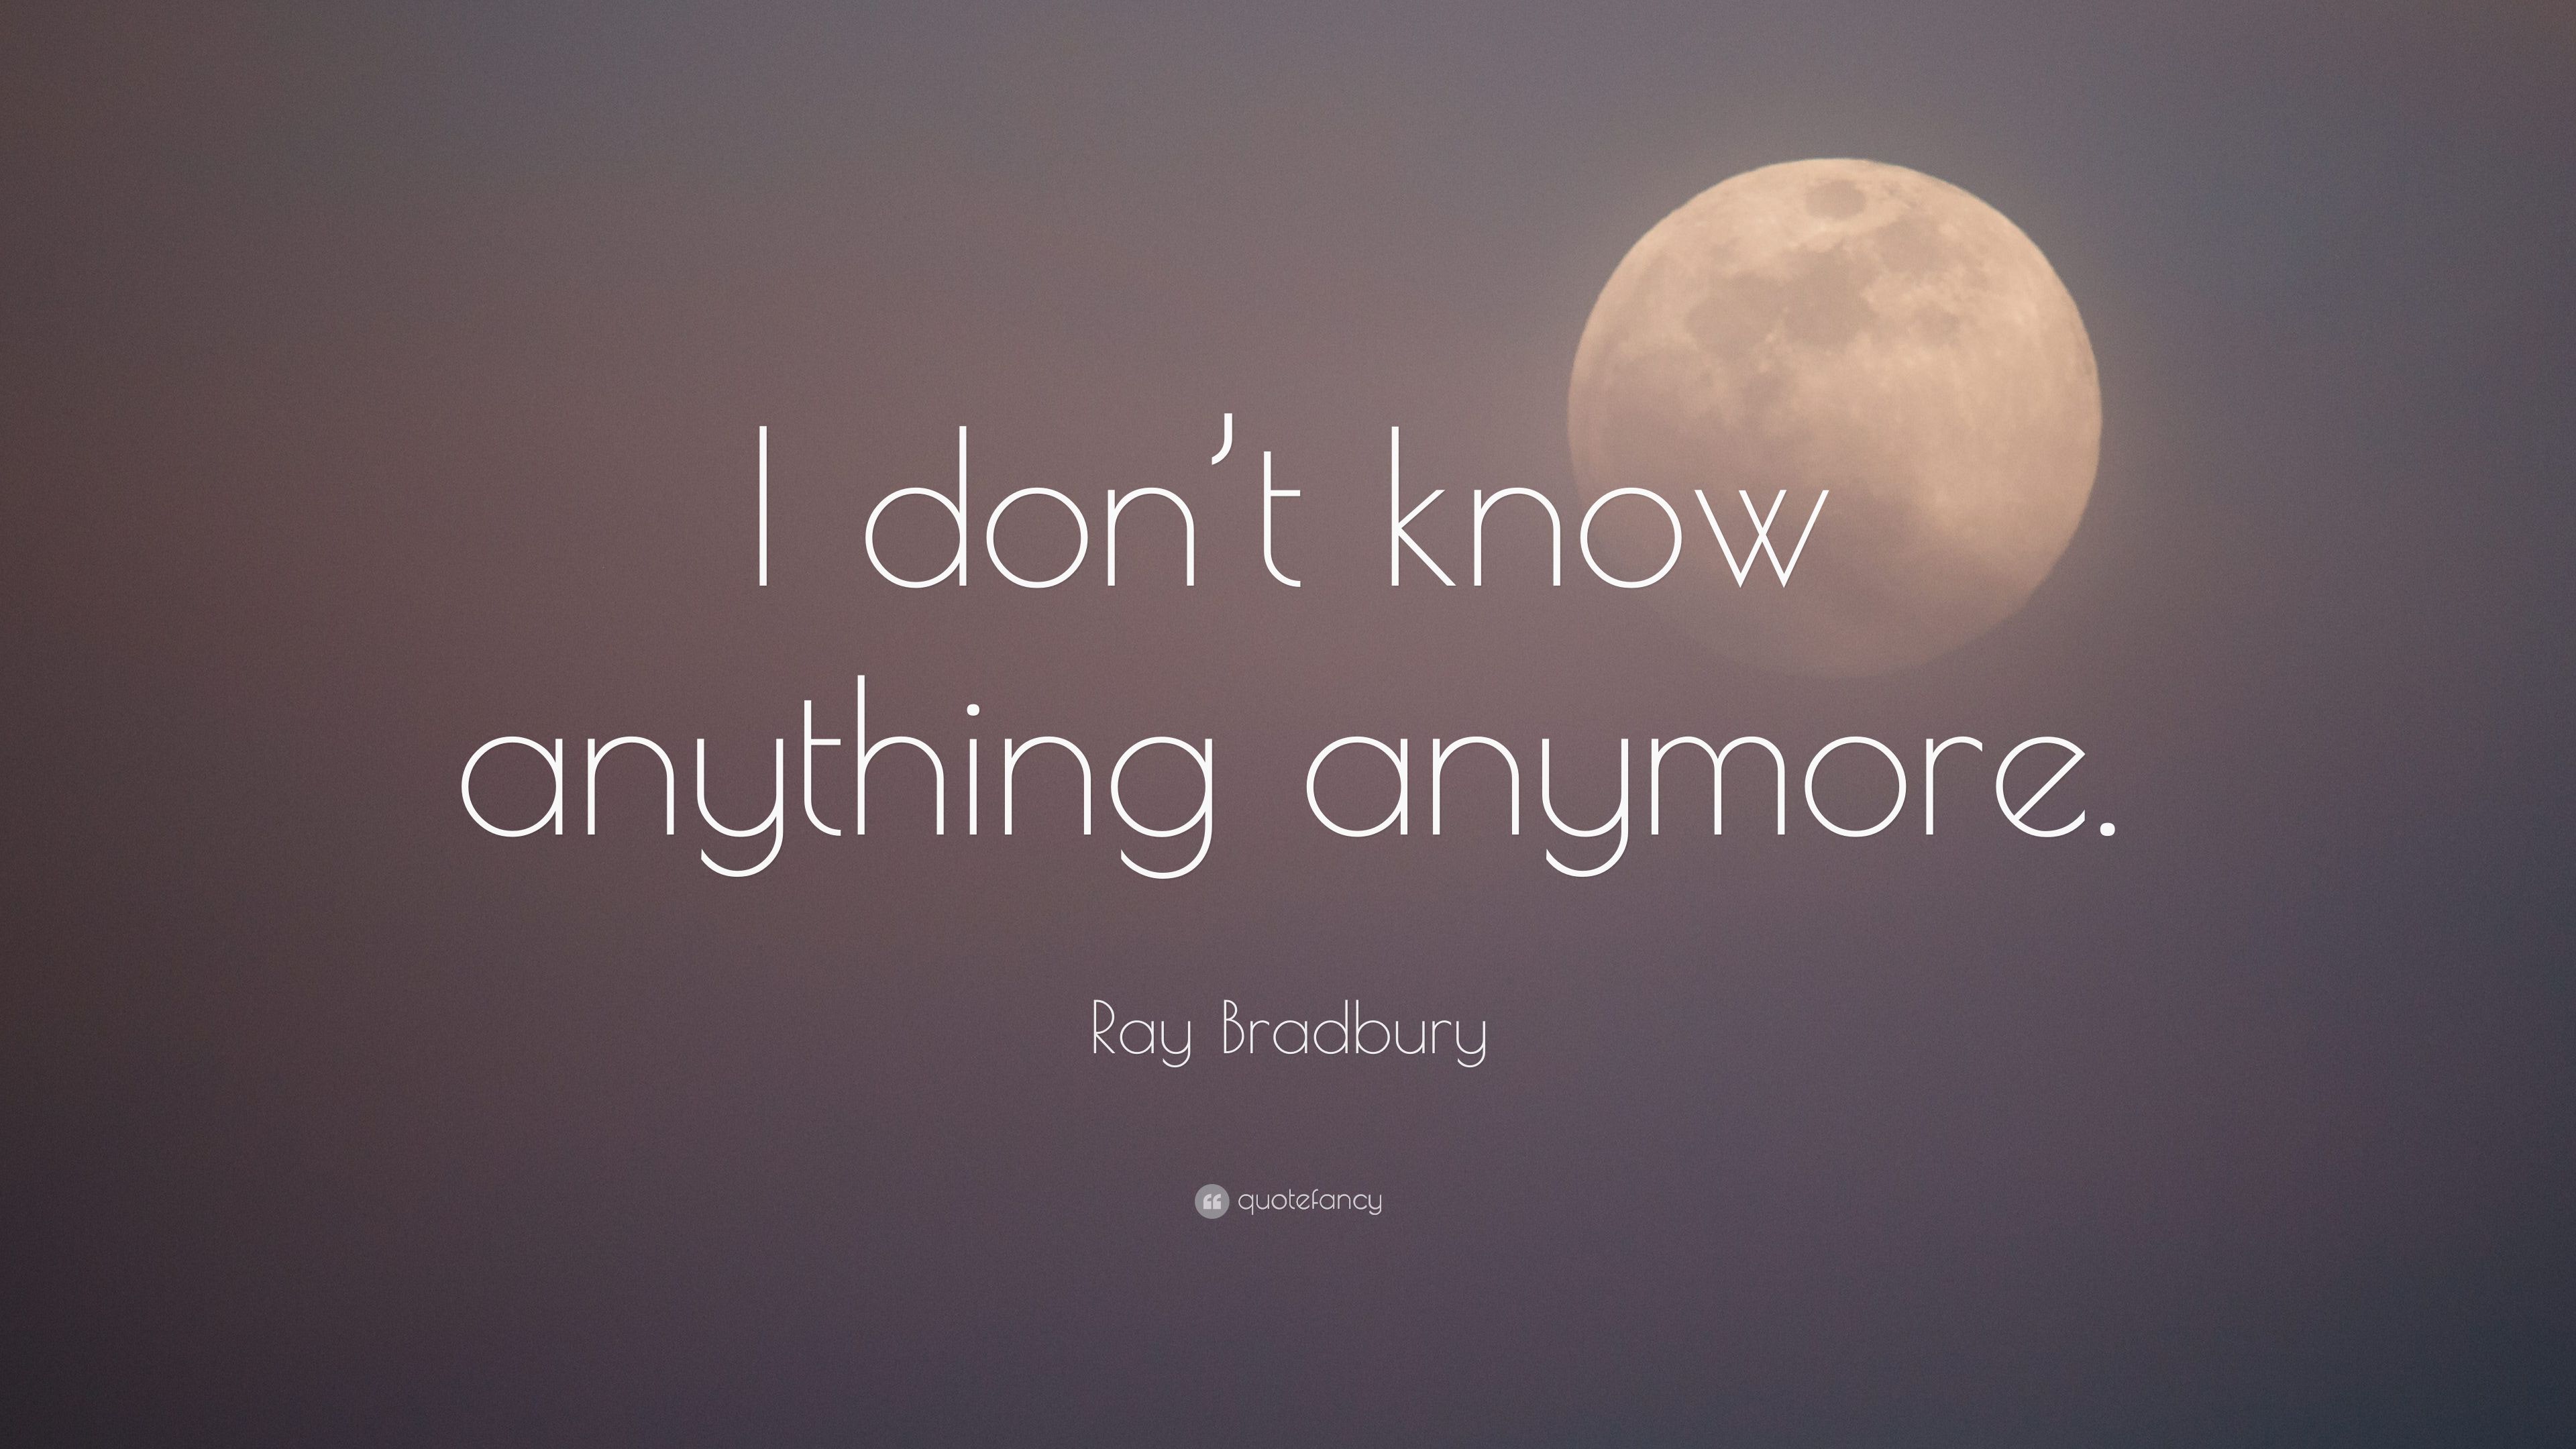 Ray Bradbury Quote: “I don't know anything anymore.” 10